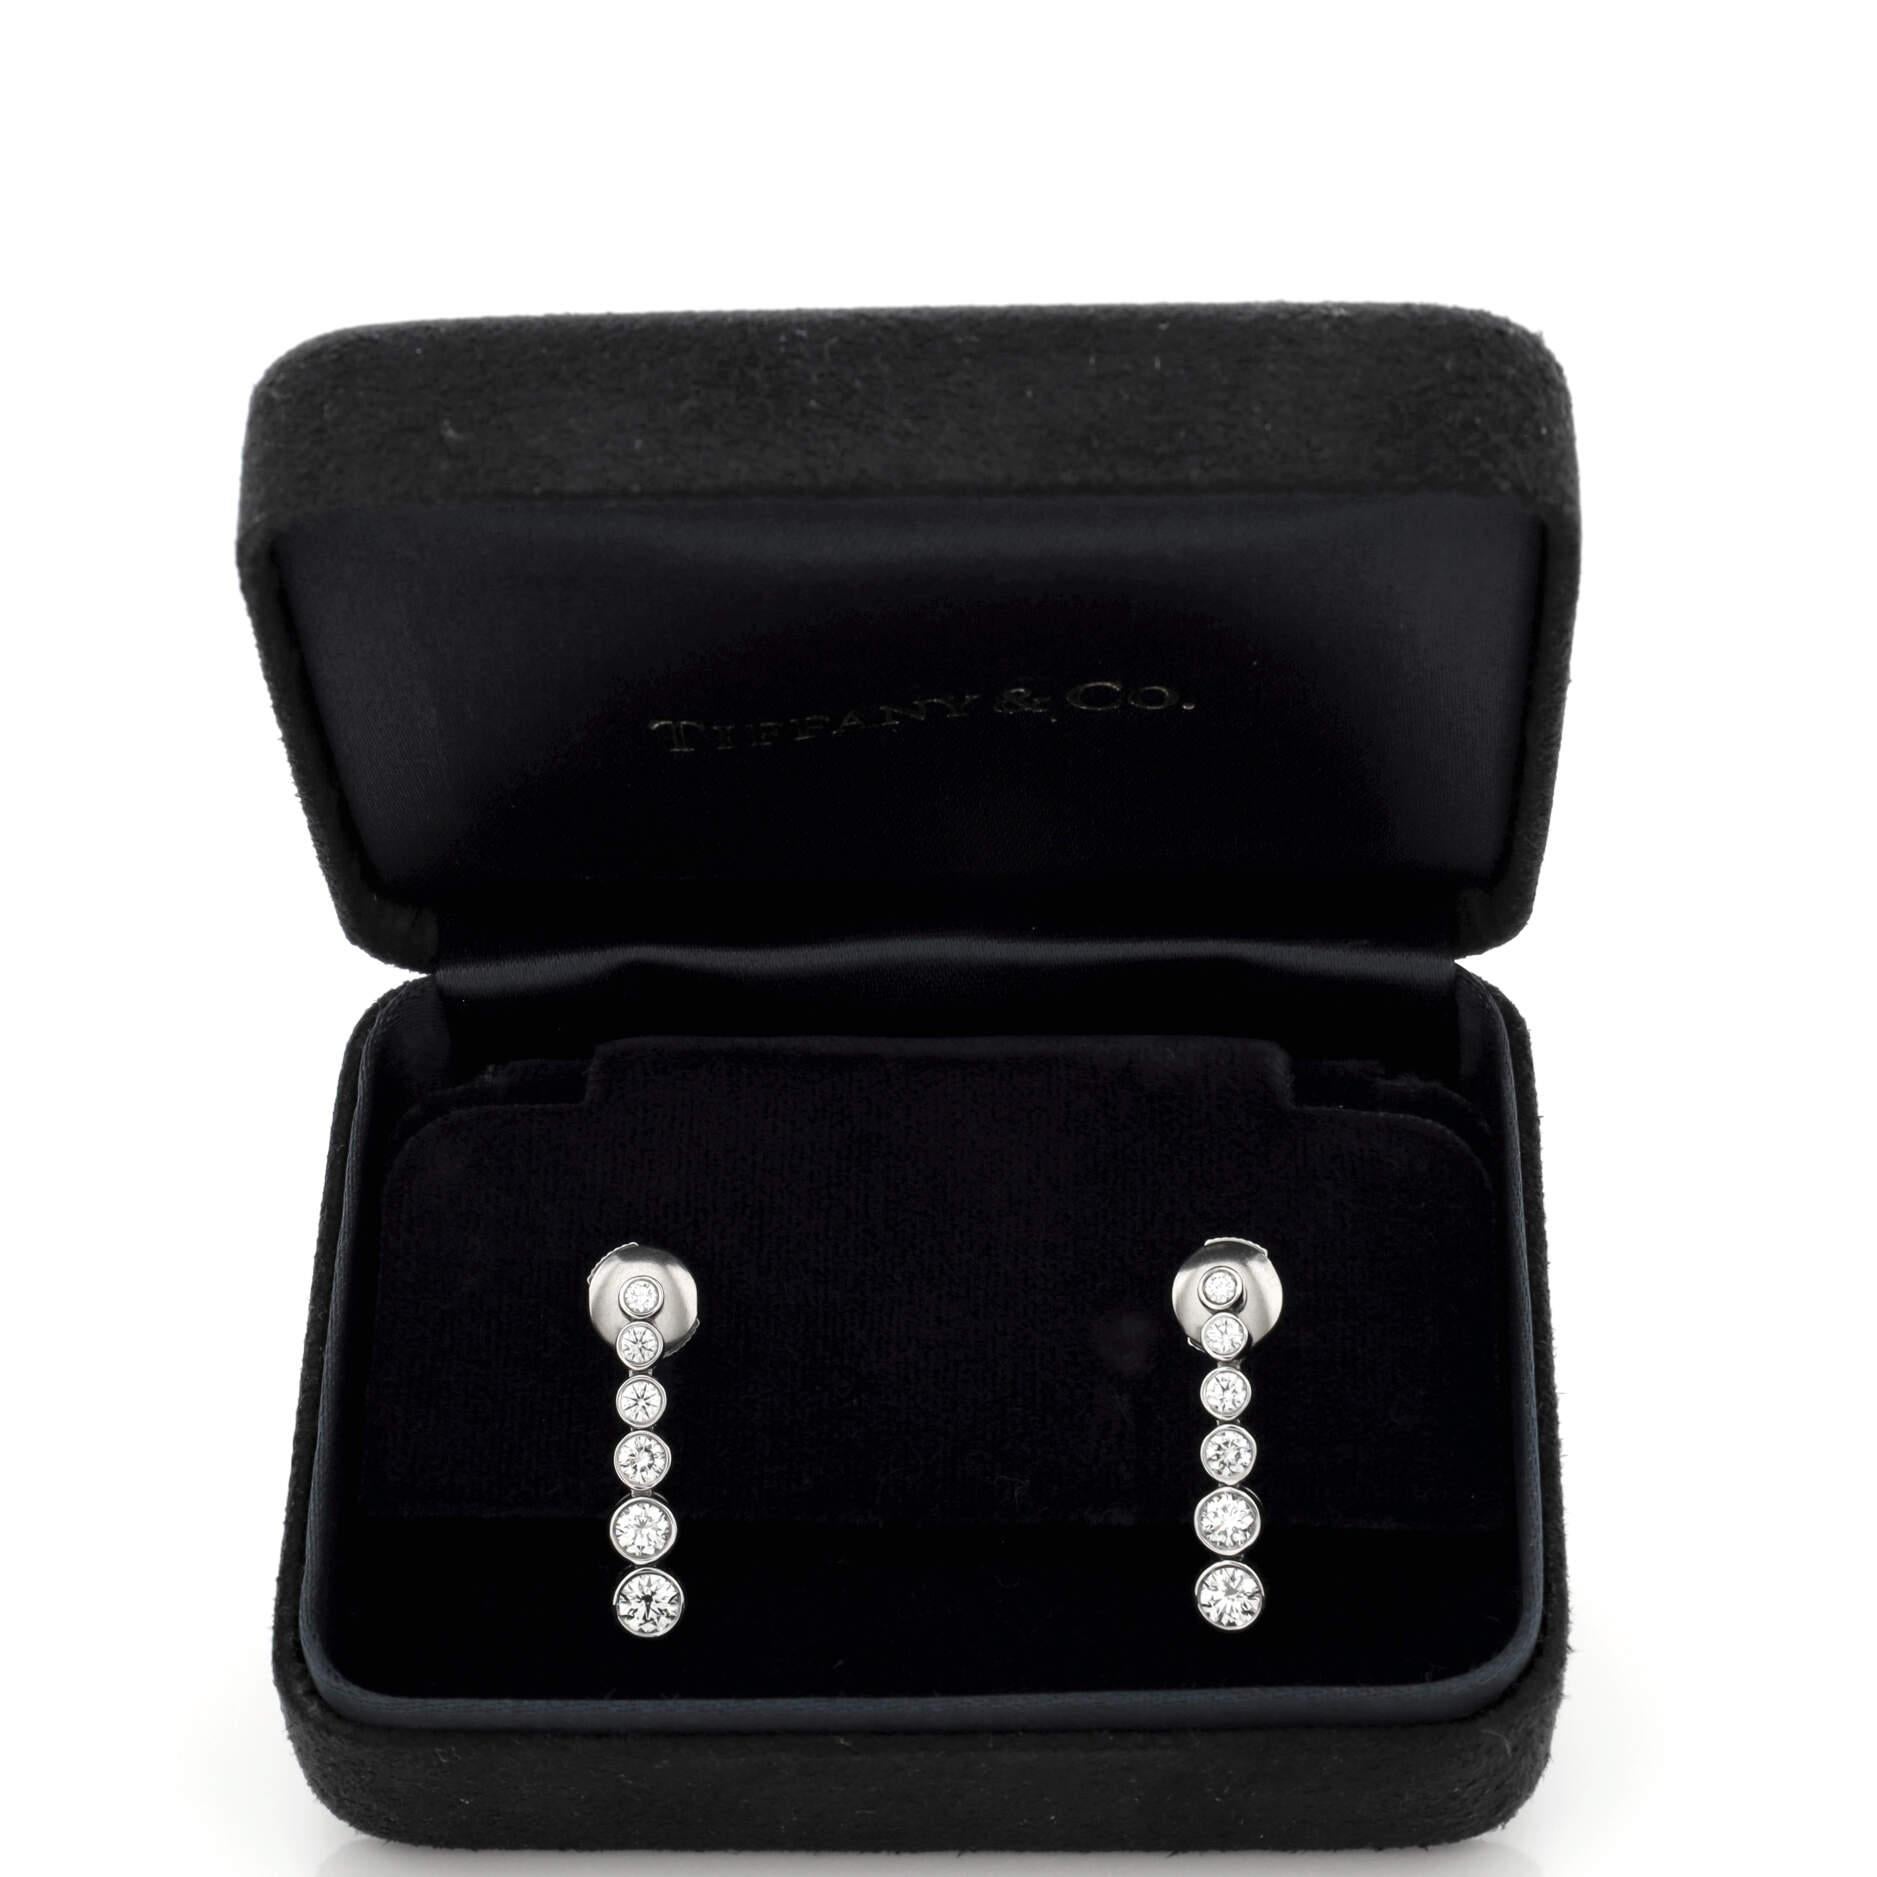 Condition: Great. Minor wear throughout.
Accessories:
Measurements: Height/Length: 22.25 mm, Width: 4.60 mm
Designer: Tiffany & Co.
Model: Graduated Jazz Drop Earrings Platinum and Diamonds
Exterior Color: Silver
Item Number: 220029/39